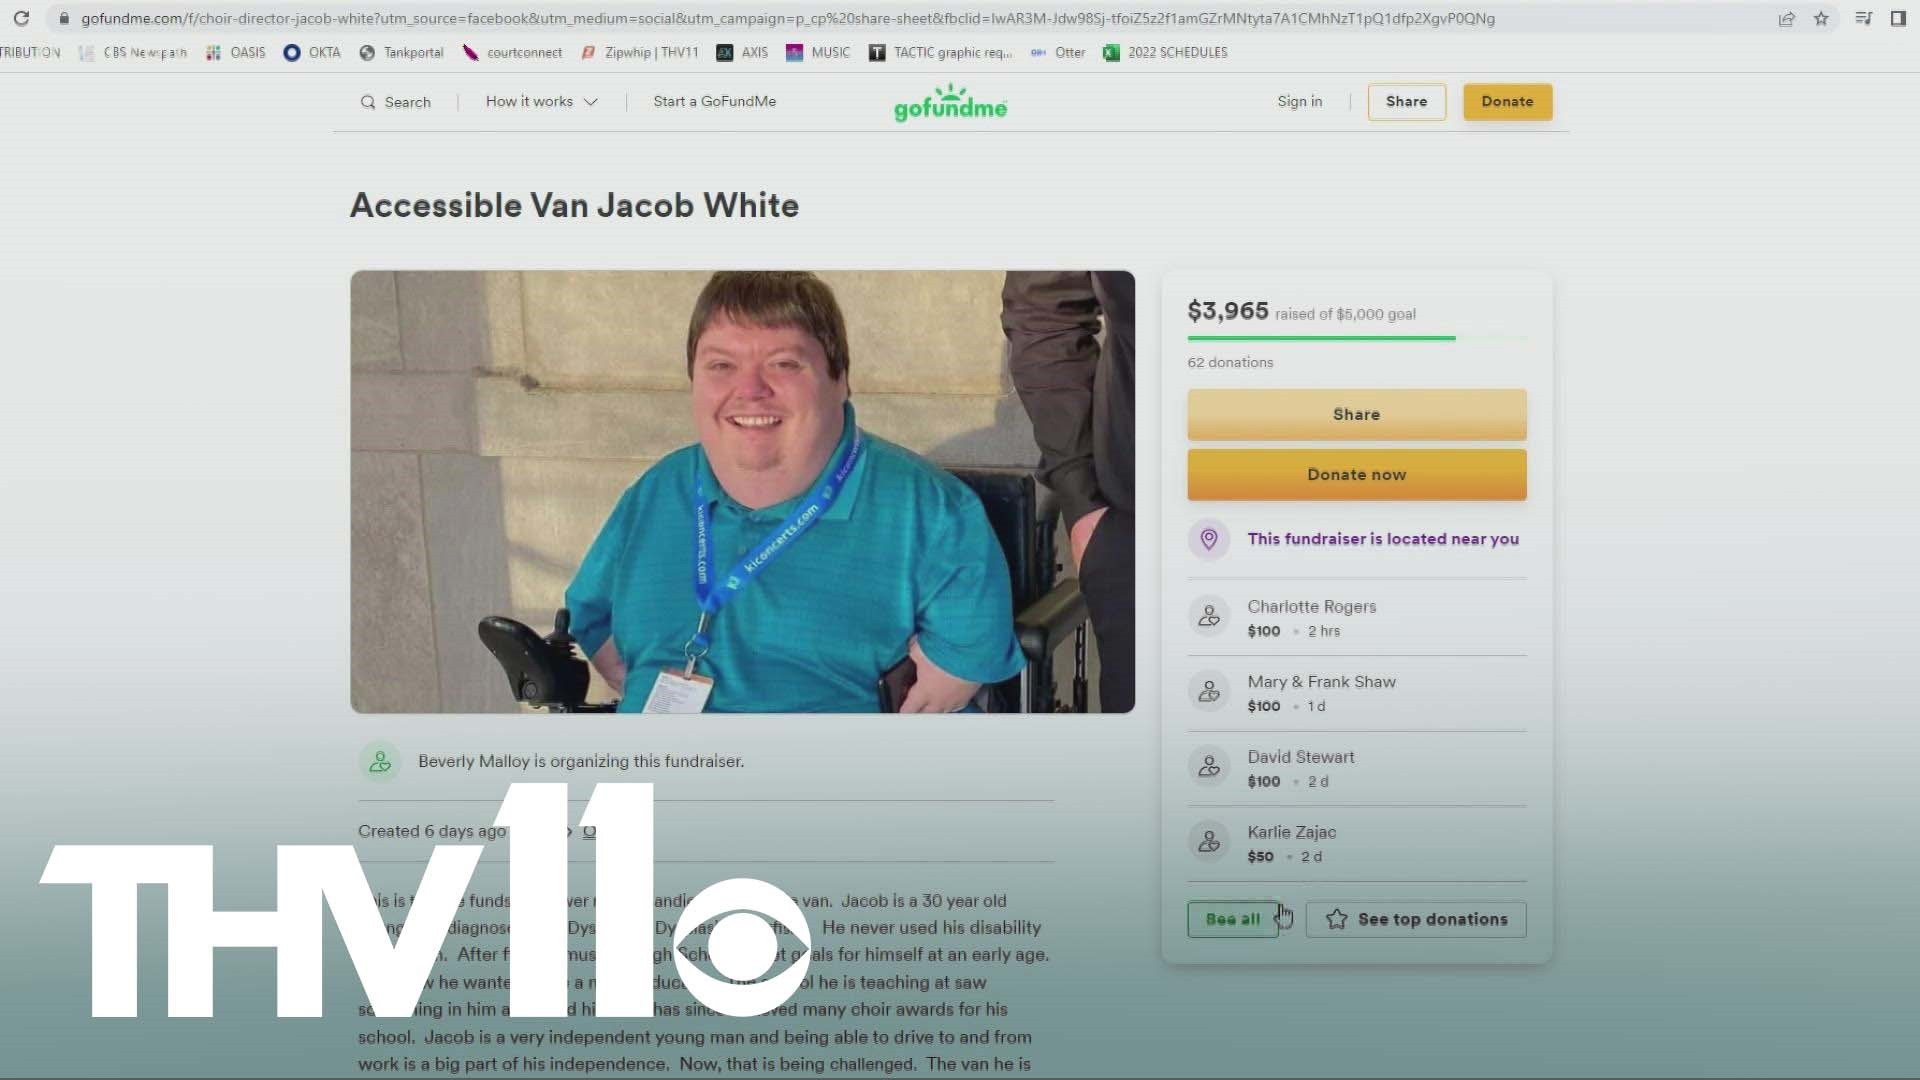 Jacob White is a choir teacher at Maumelle Charter High School and after his wheelchair lift stopped working in his van, his community stepped up.